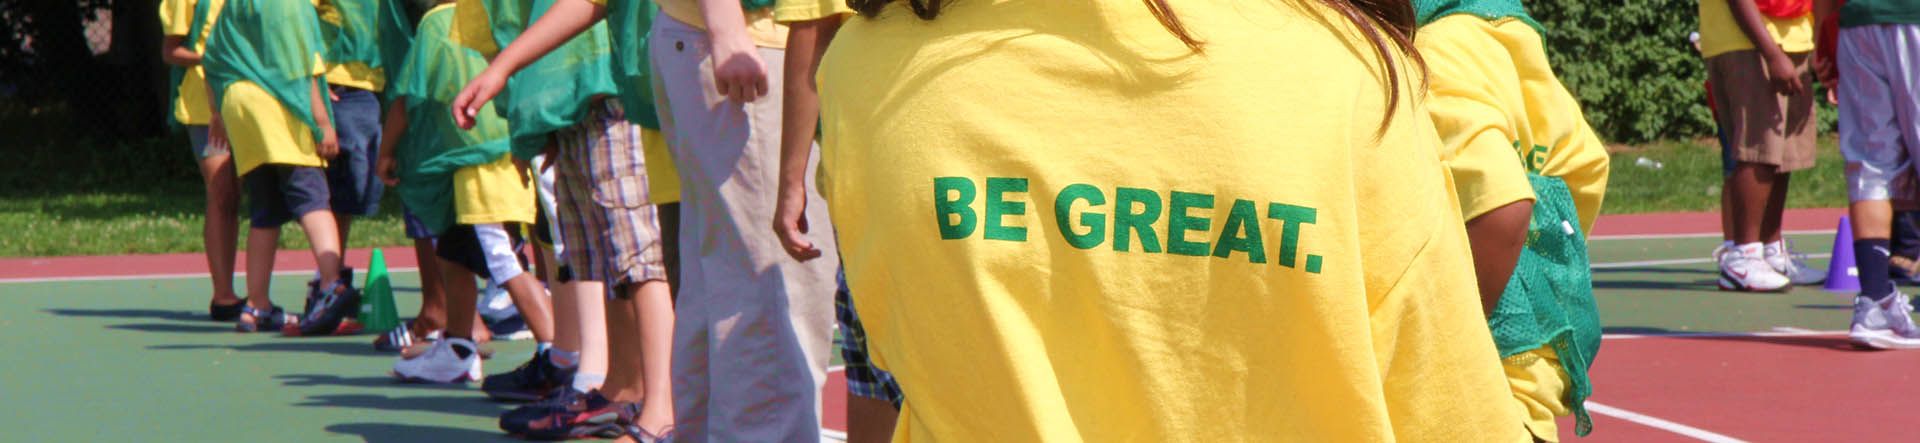 Image of kids at a relay race wearing tshirts that say "Be Great"